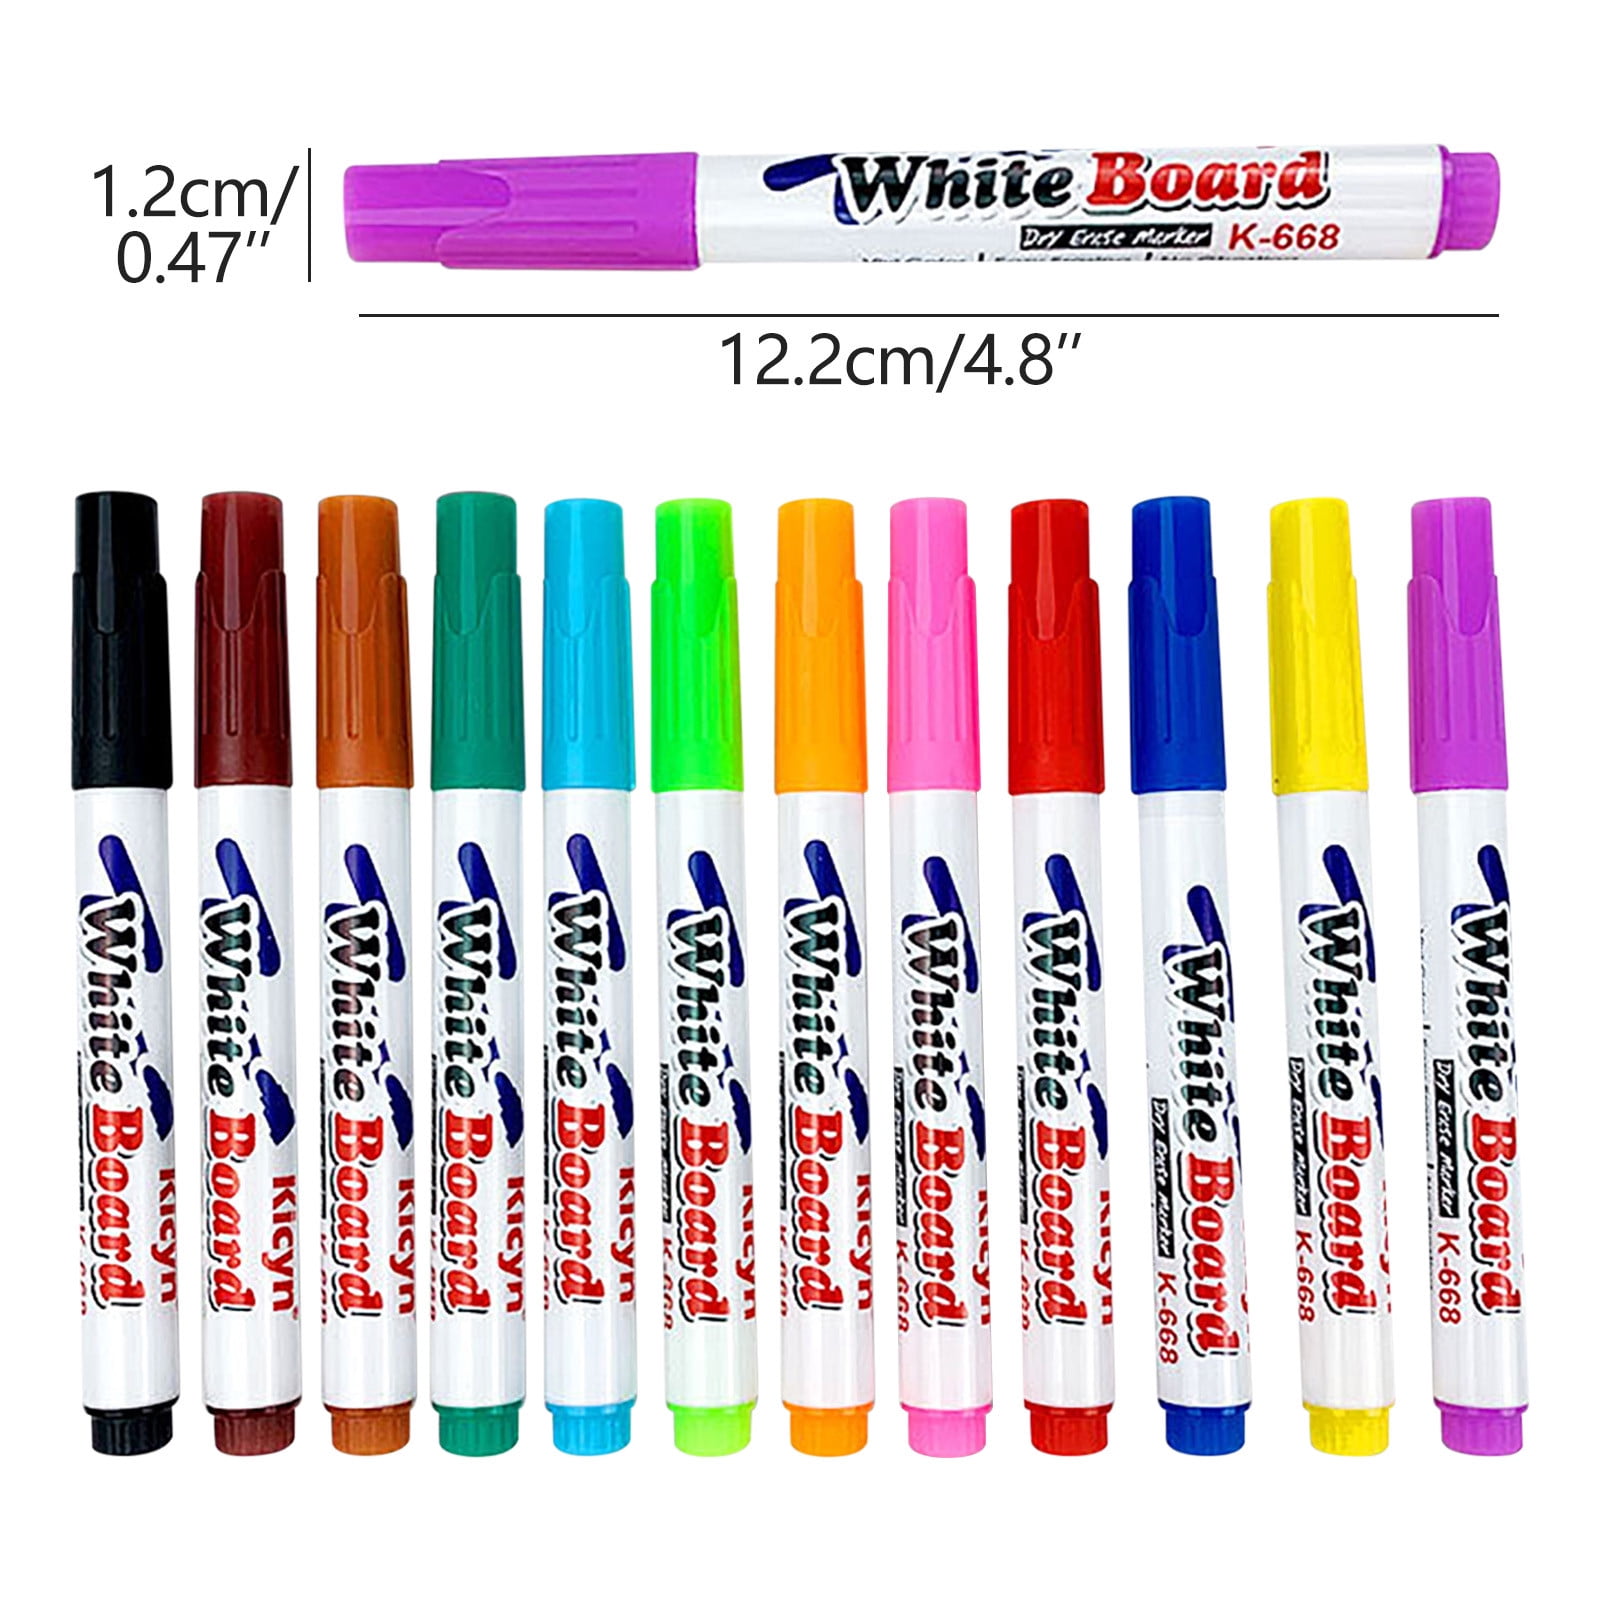  maxtek Dry Erase Markers Ultra Fine Tip, 0.7mm, Low Odor,  Extra Fine Point Dry Erase Markers for Planning Whiteboard, Calendar  Boards, 12 Count Assorted Colors Whiteboard Markers for Kids 